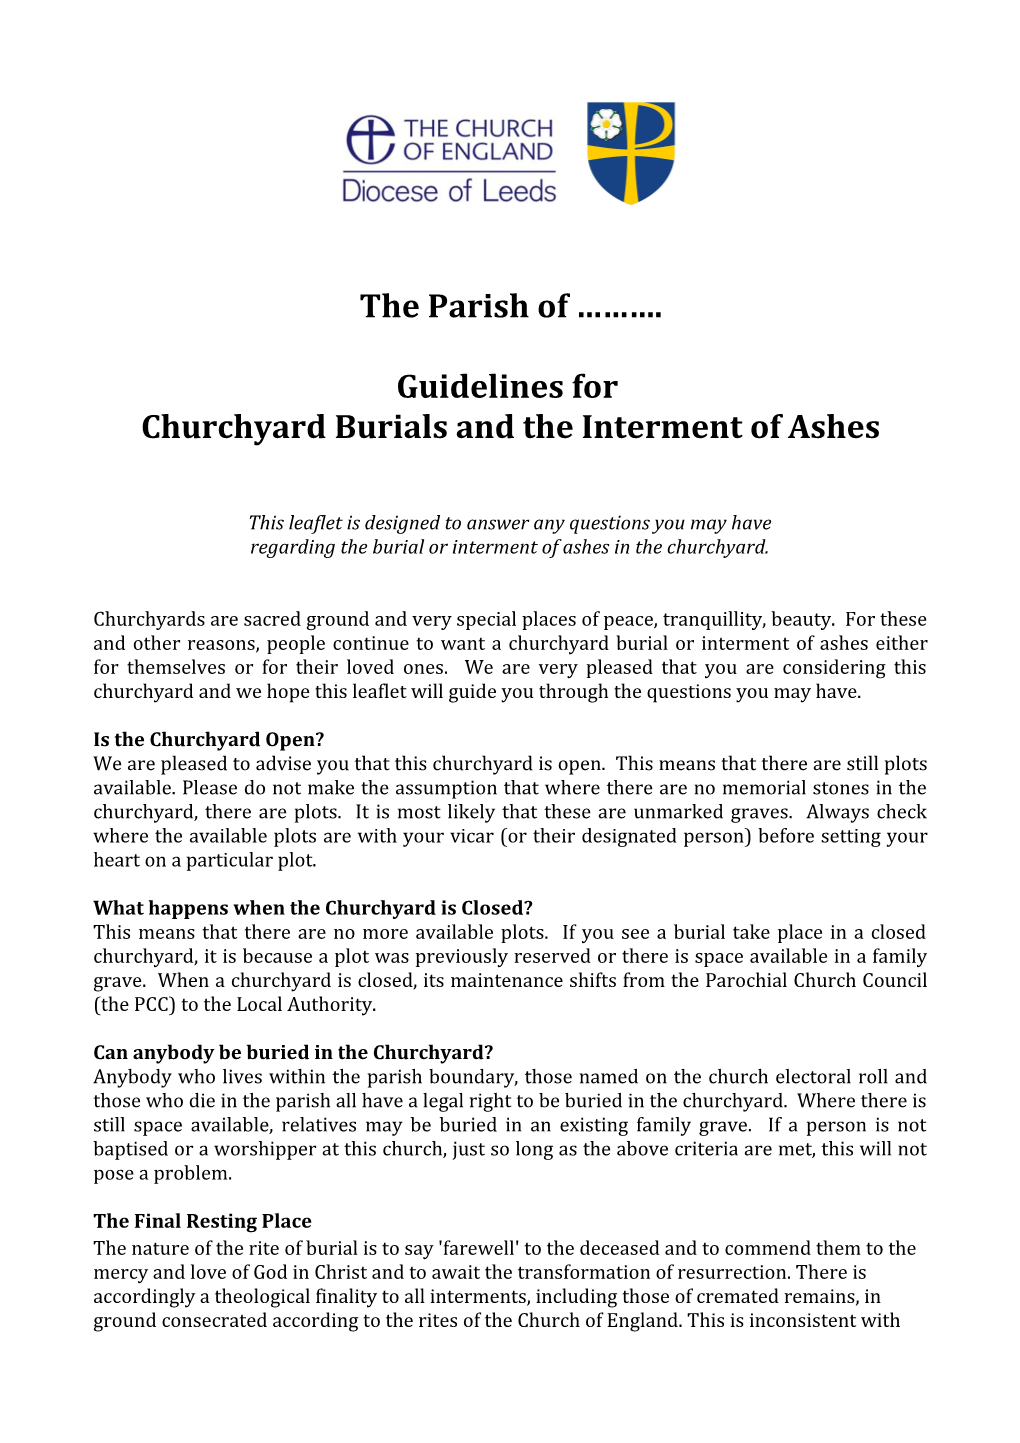 Churchyard Burials and the Interment of Ashes